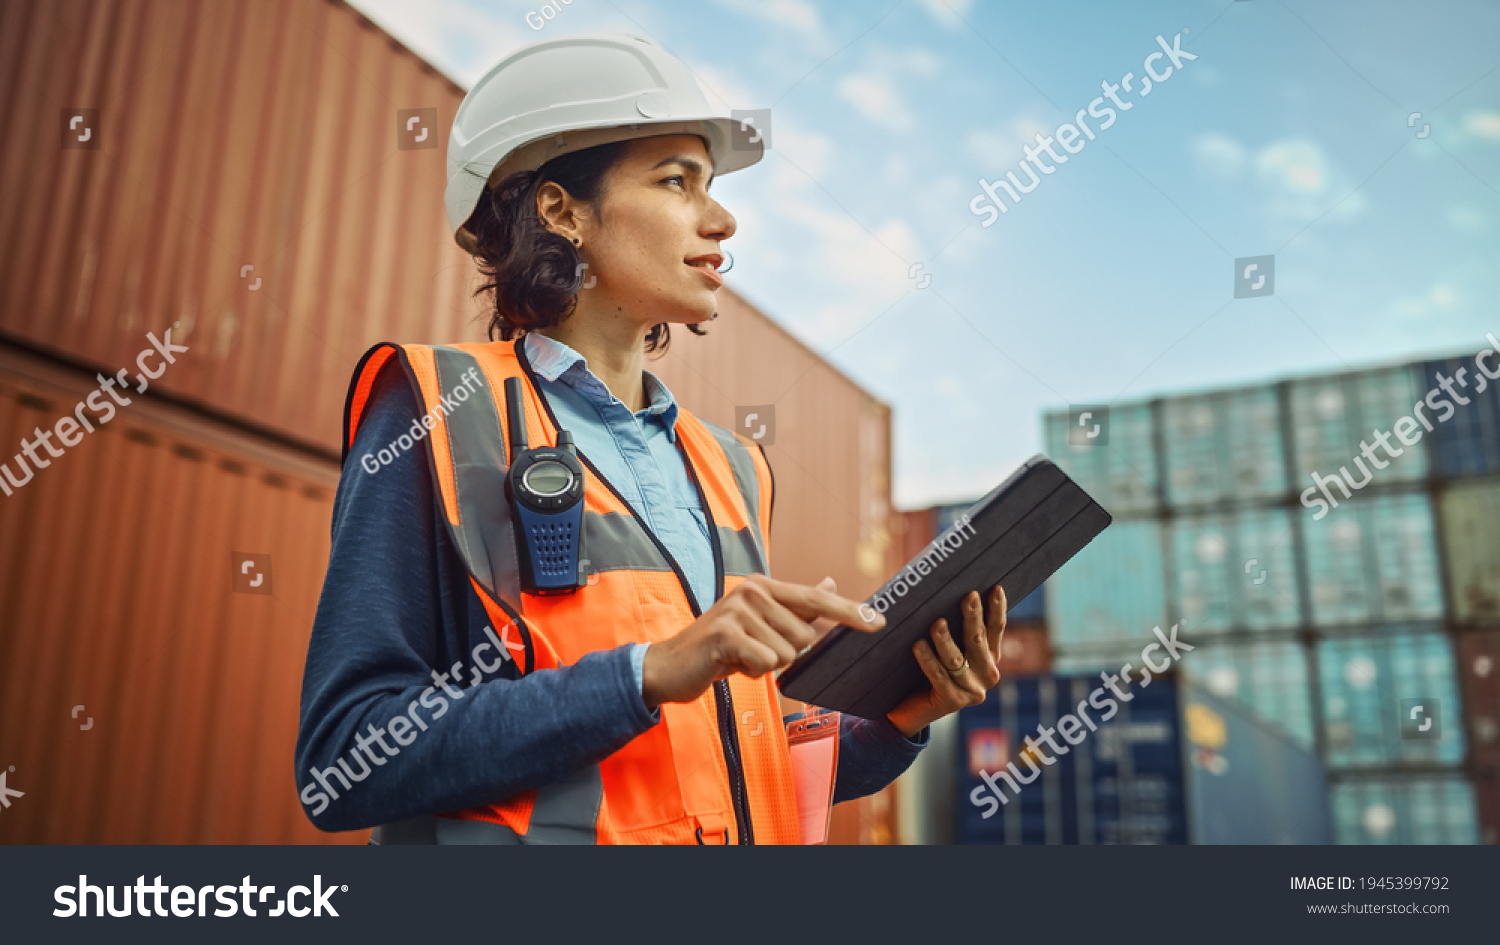 Smiling Portrait of a Beautiful Latin Female Industrial Engineer in White Hard Hat, High-Visibility Vest Working on Tablet Computer. Inspector or Safety Supervisor in Container Terminal. #1945399792